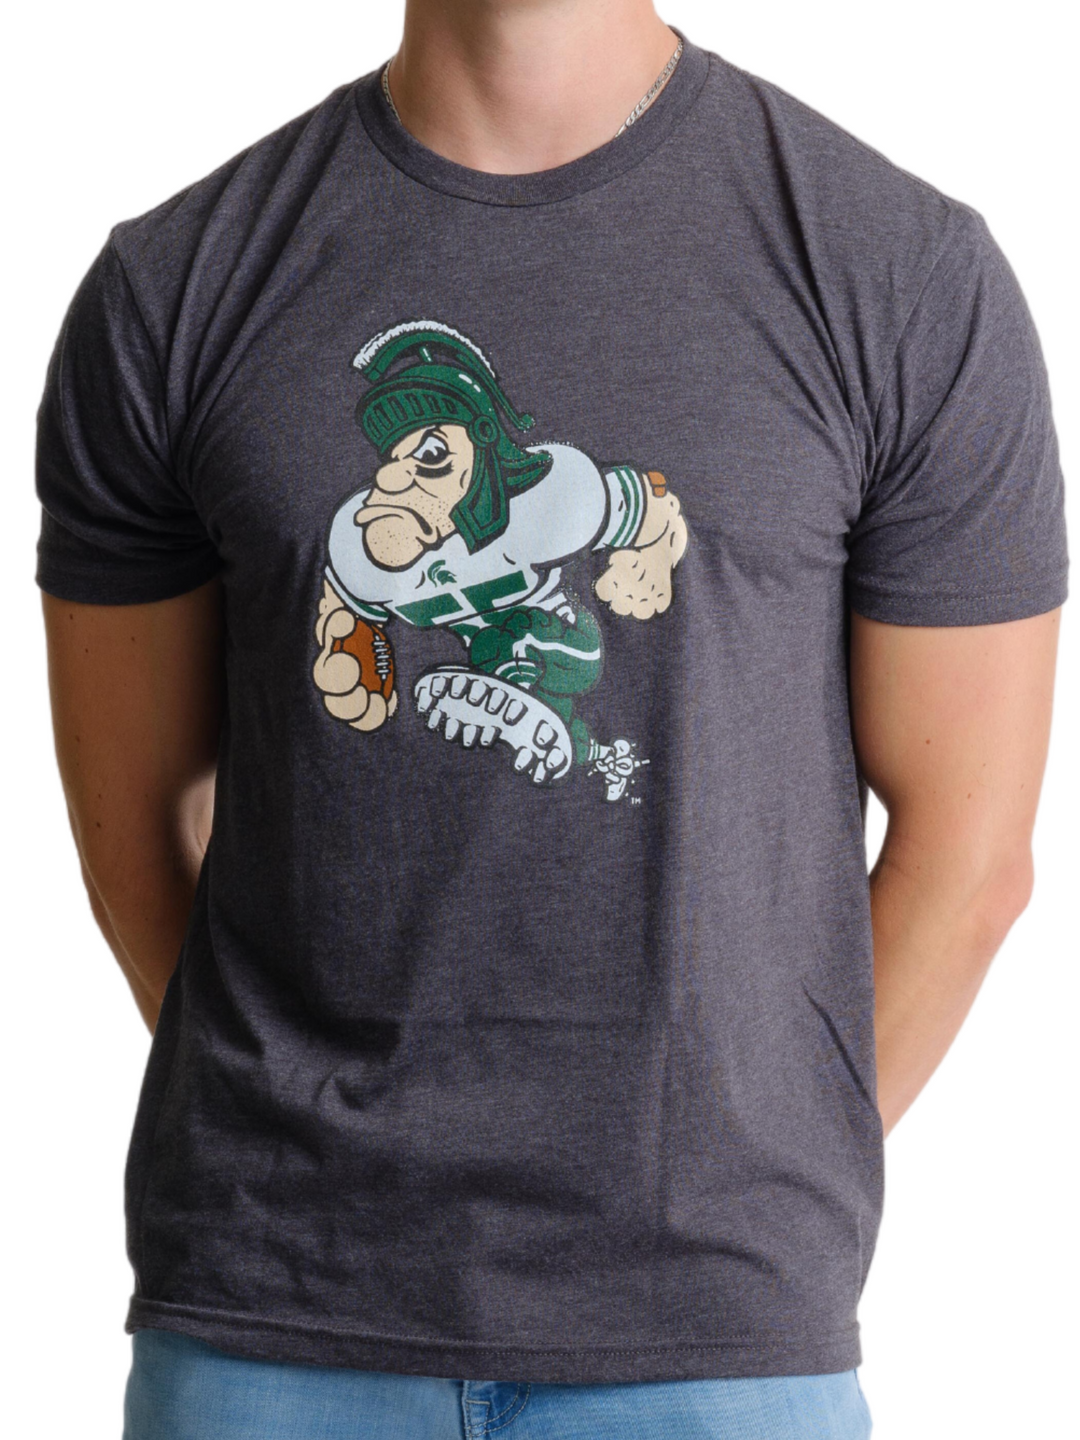 Vintage Michigan State Gruff Sparty T Shirt from Nudge Printing